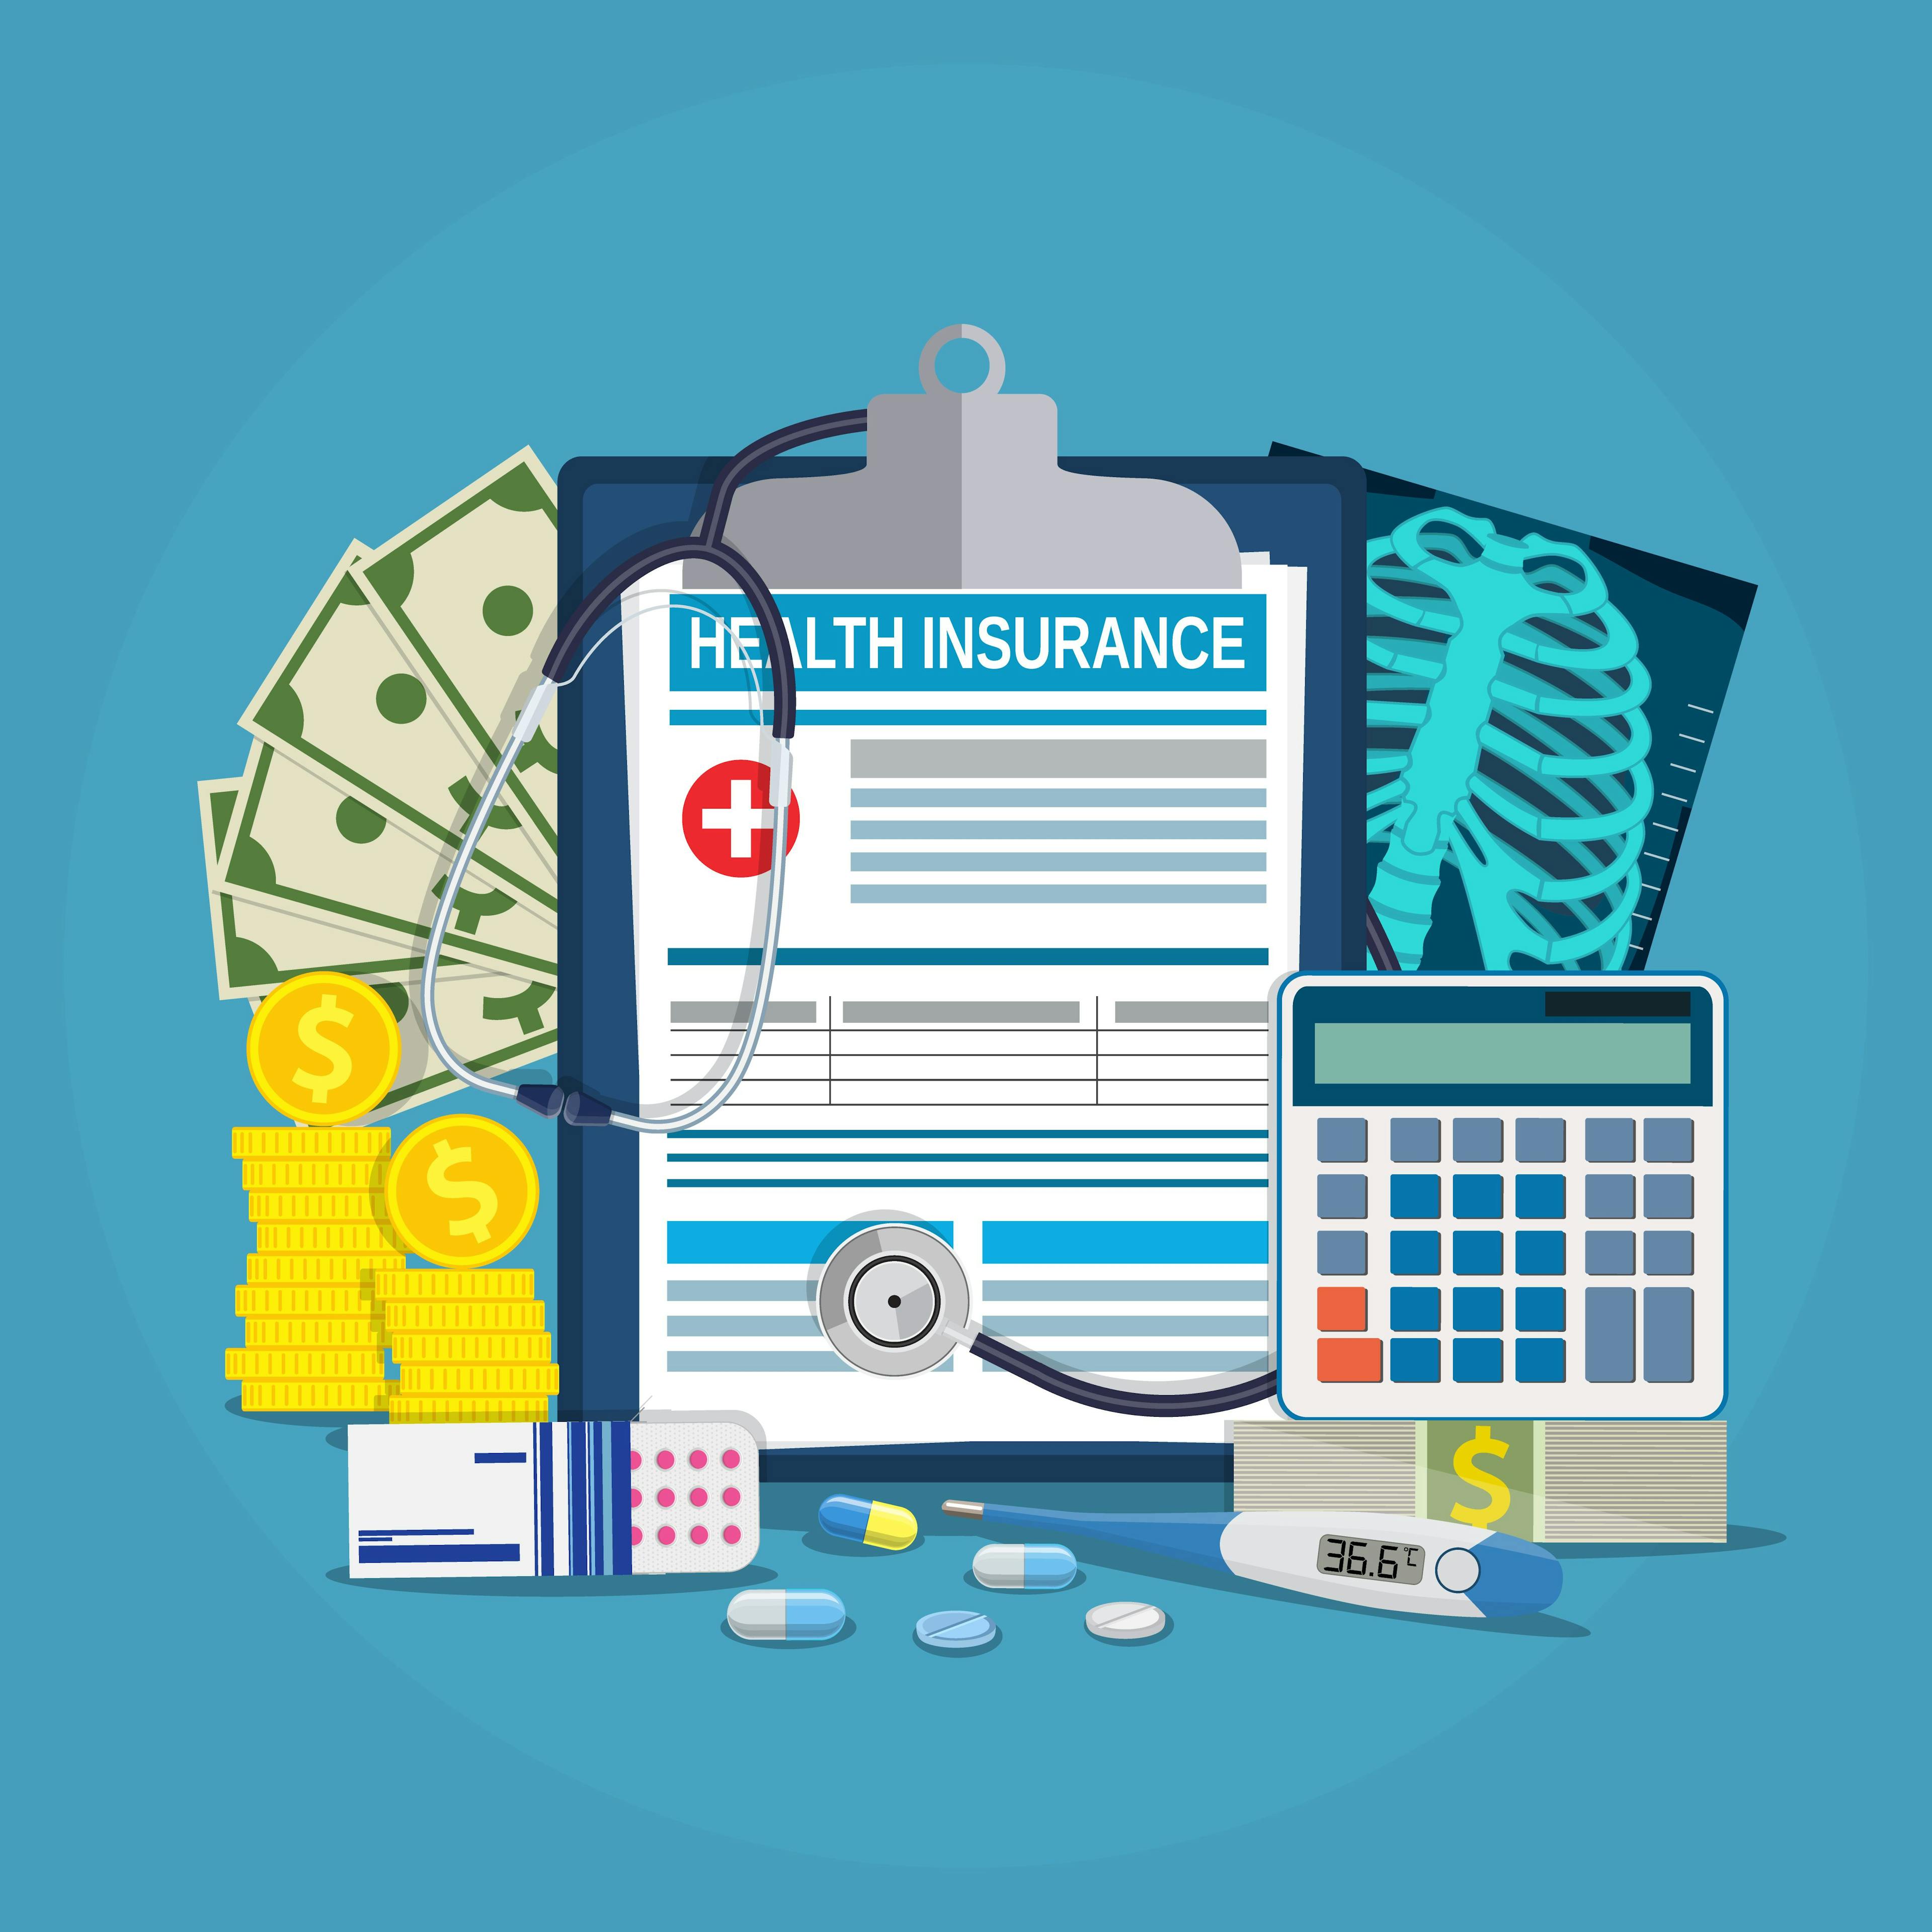 graphic of images representing health insurance, including coins, calculator, insurance document